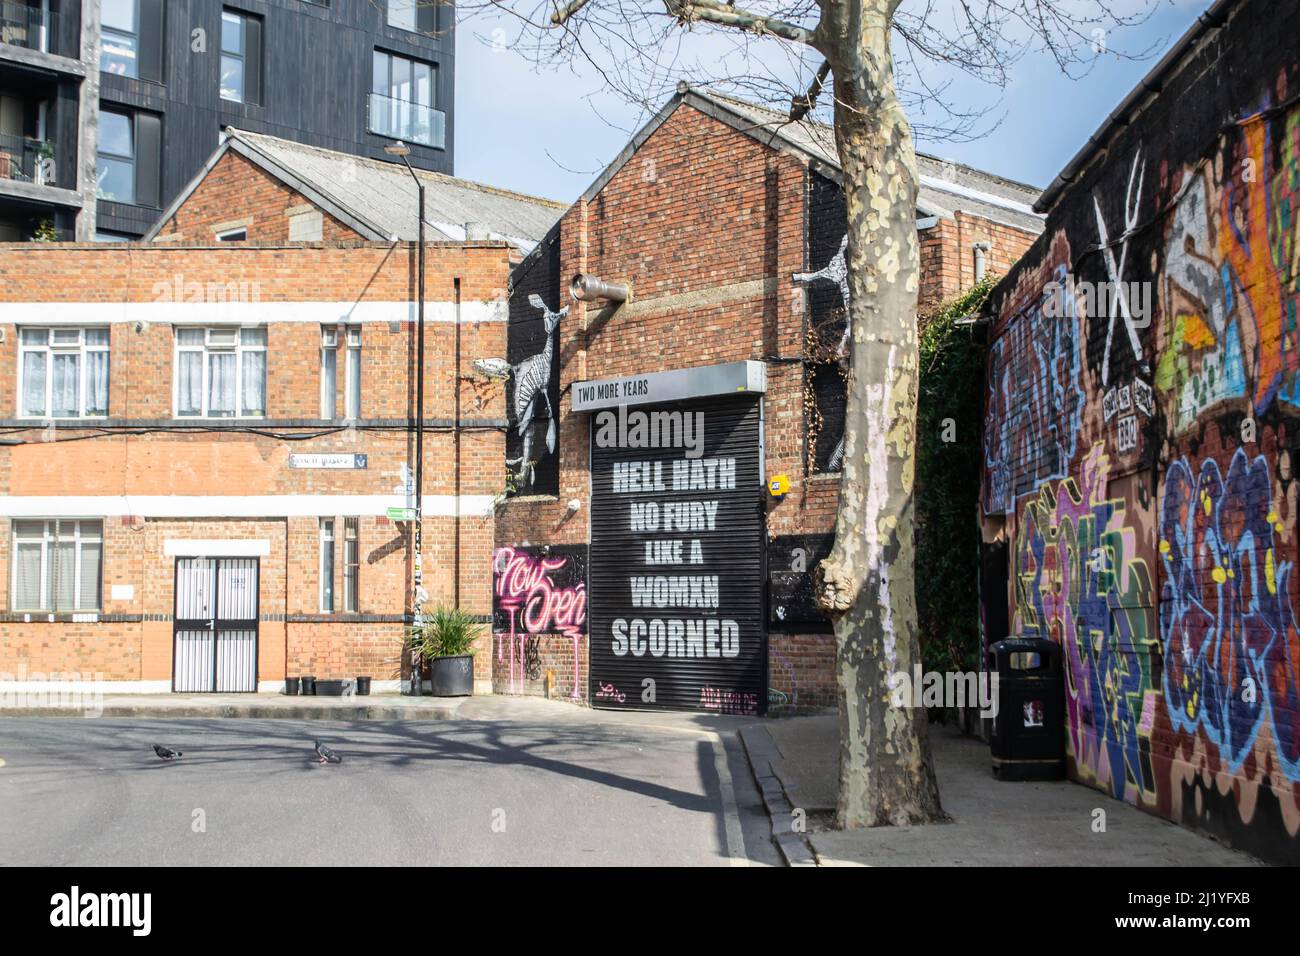 HACKNEY, LONDON, ENGLAND- 23 March 2022: Two More Years bar in Hackney where a mezzanine floor colapsed in February 2022 Stock Photo